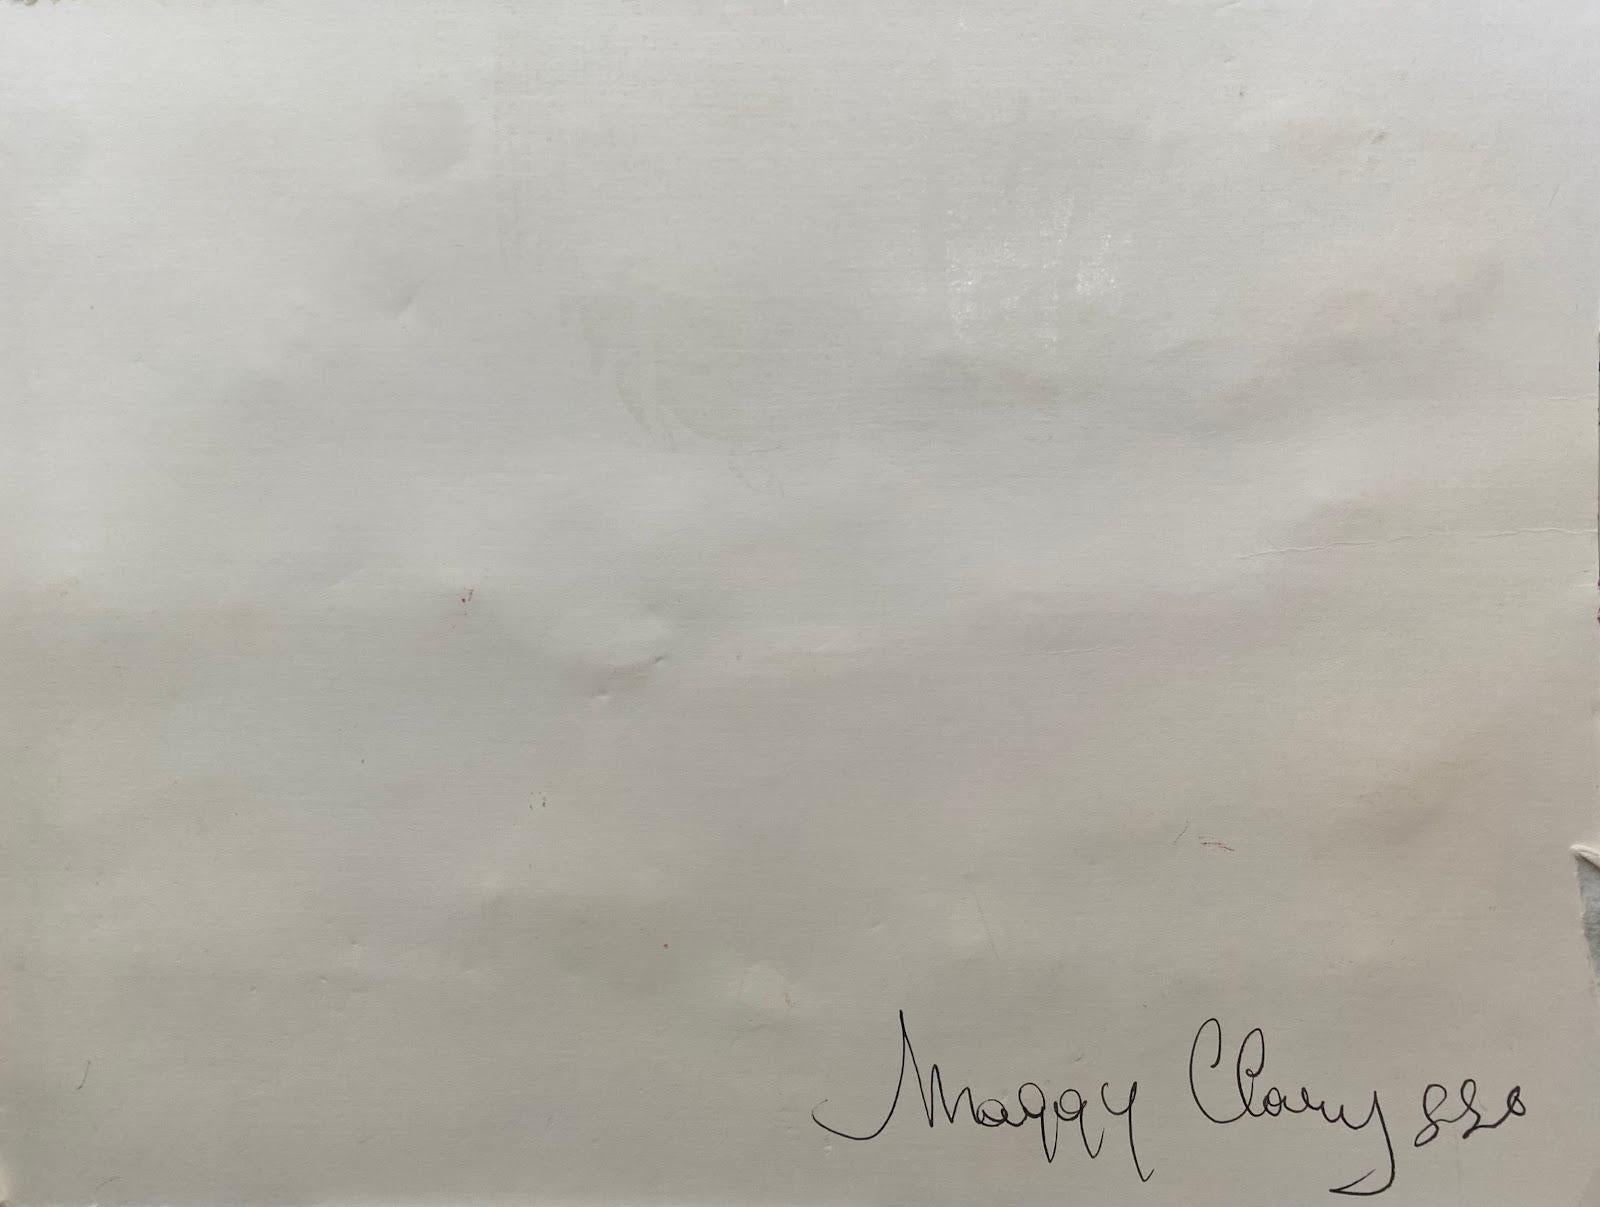 Maggy Clarysse (1931-2011)
oil on thick card, unframed
7 x 9.5 inches
signed initals                                                                             
condition: excellent
provenance: all the paintings we have by this artist have come